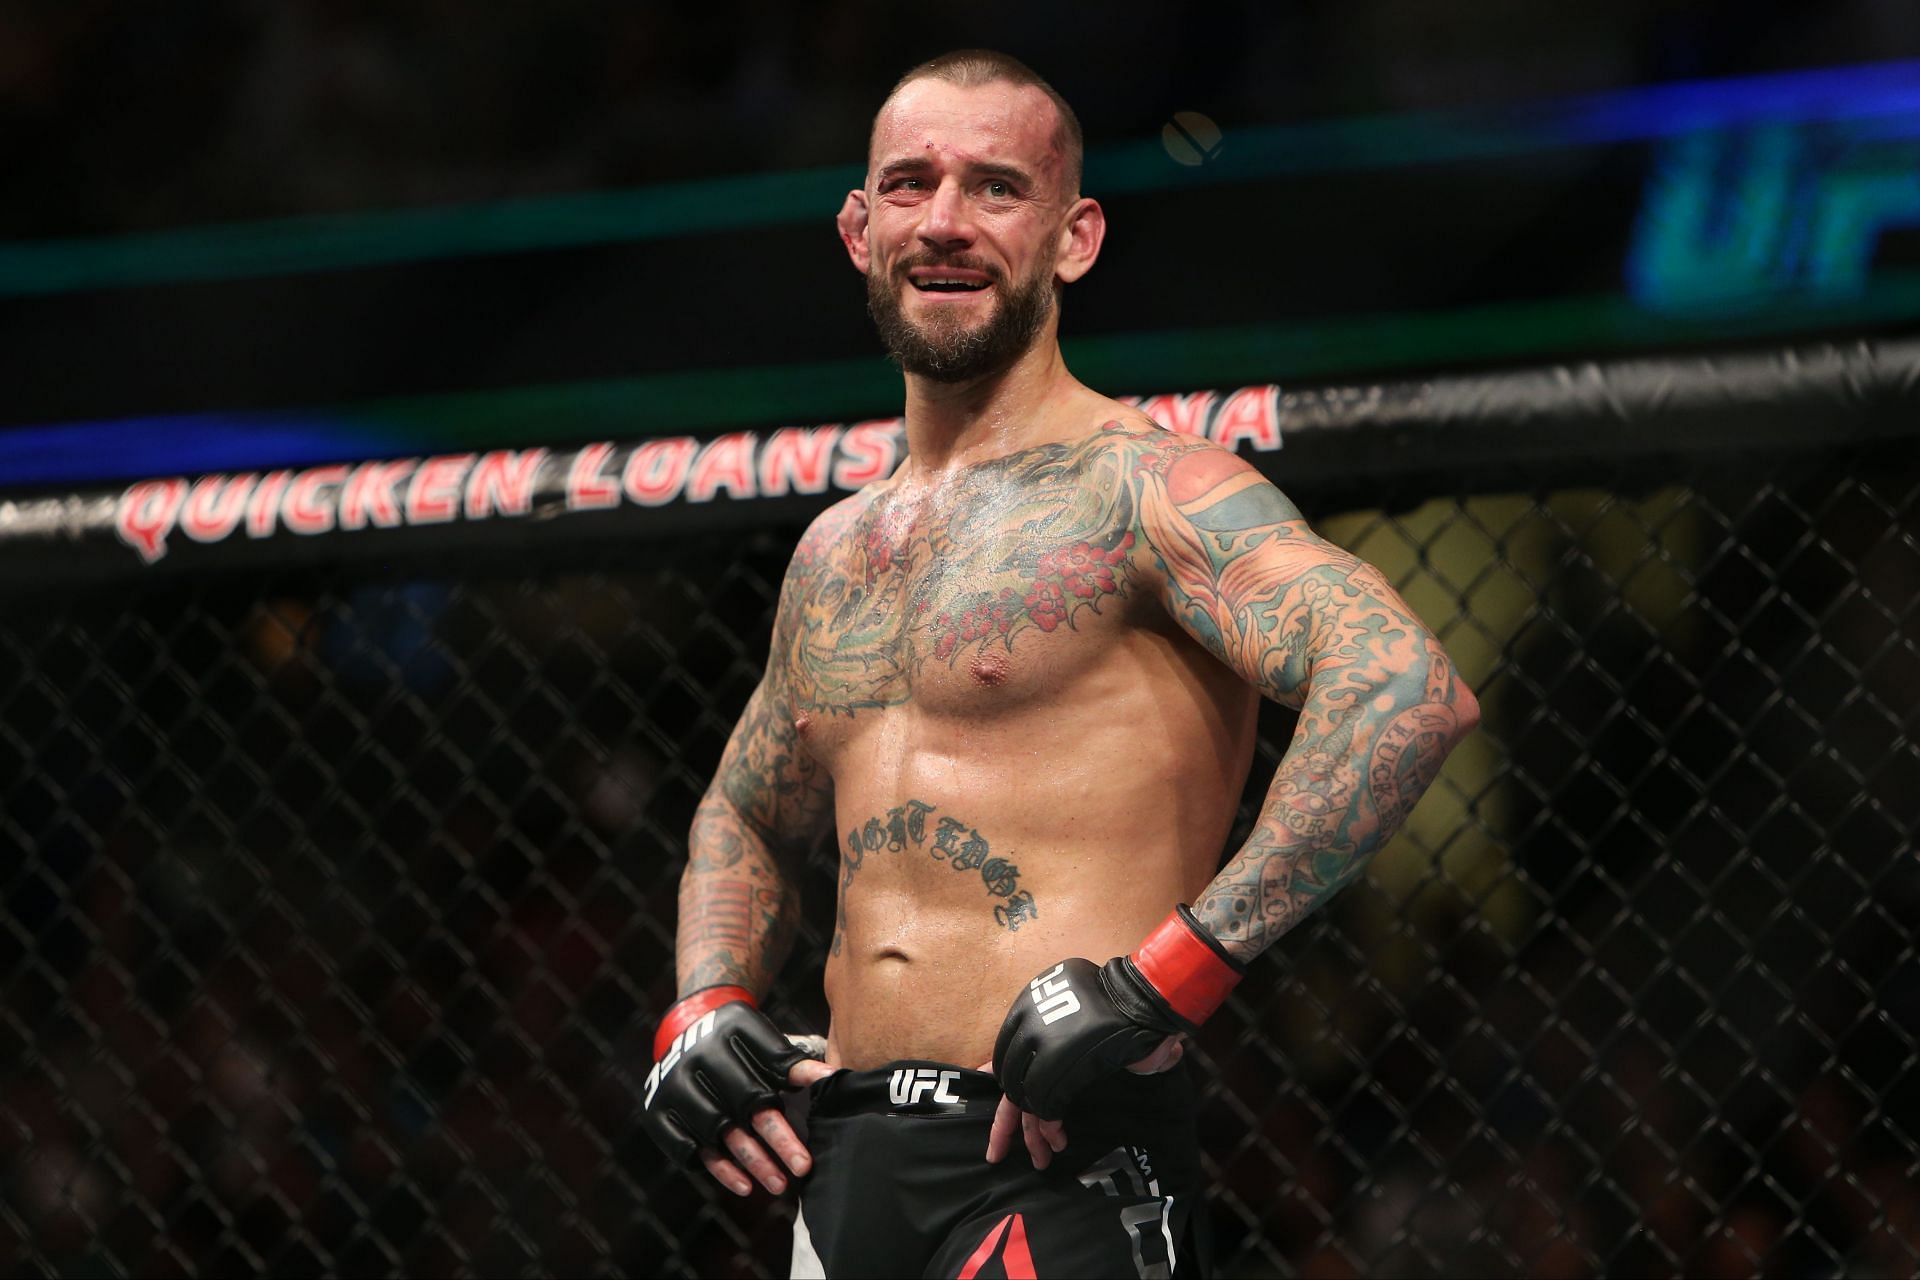 Punk has an MMA record of 0-1 (1NC)